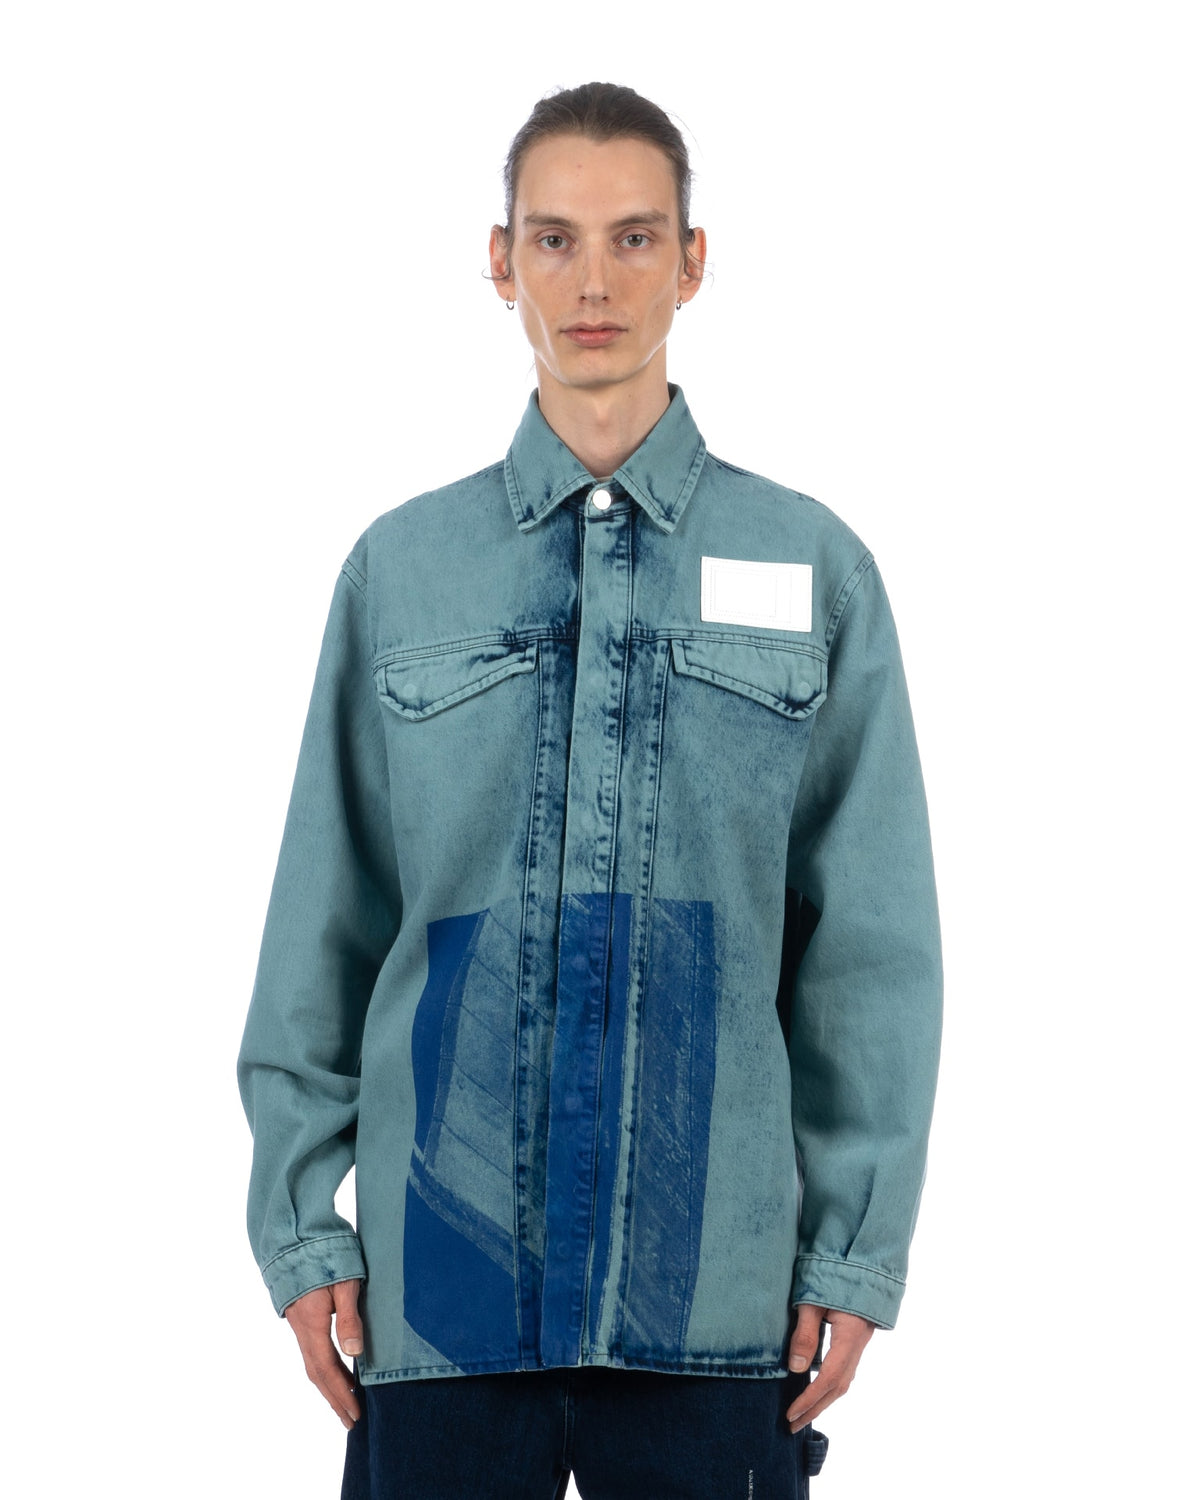 A-COLD-WALL* | Bleached Overdyed Shirt Faded Teal - Concrete